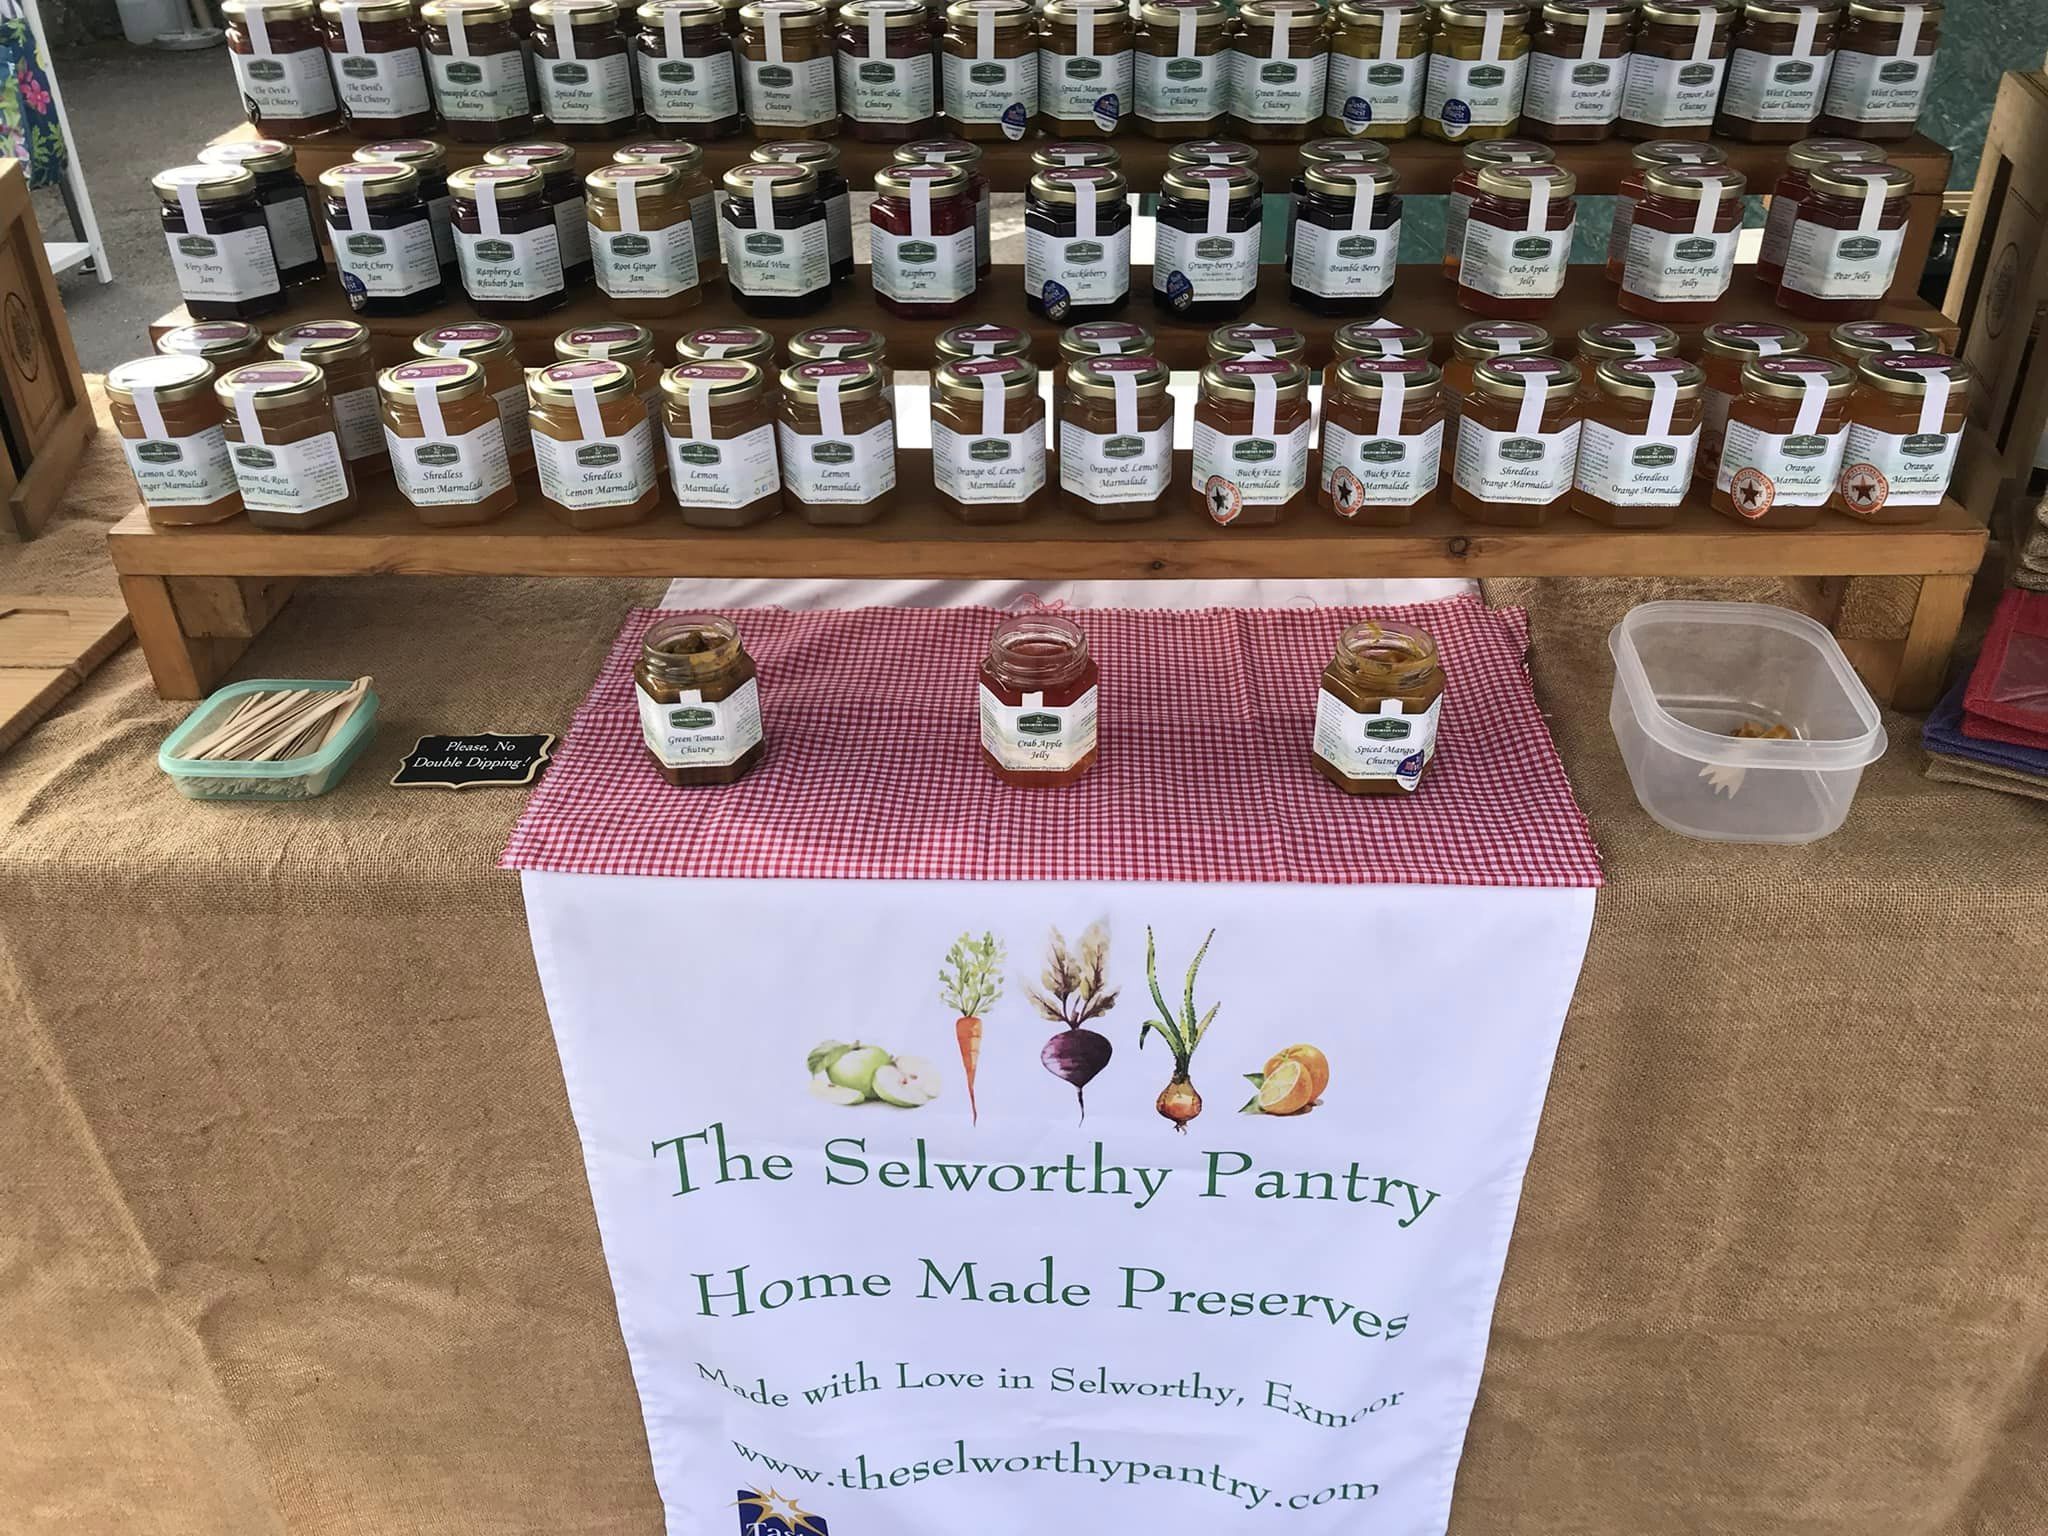 Selworthy Pantry Jars for sale at Dulverton Farmers Market